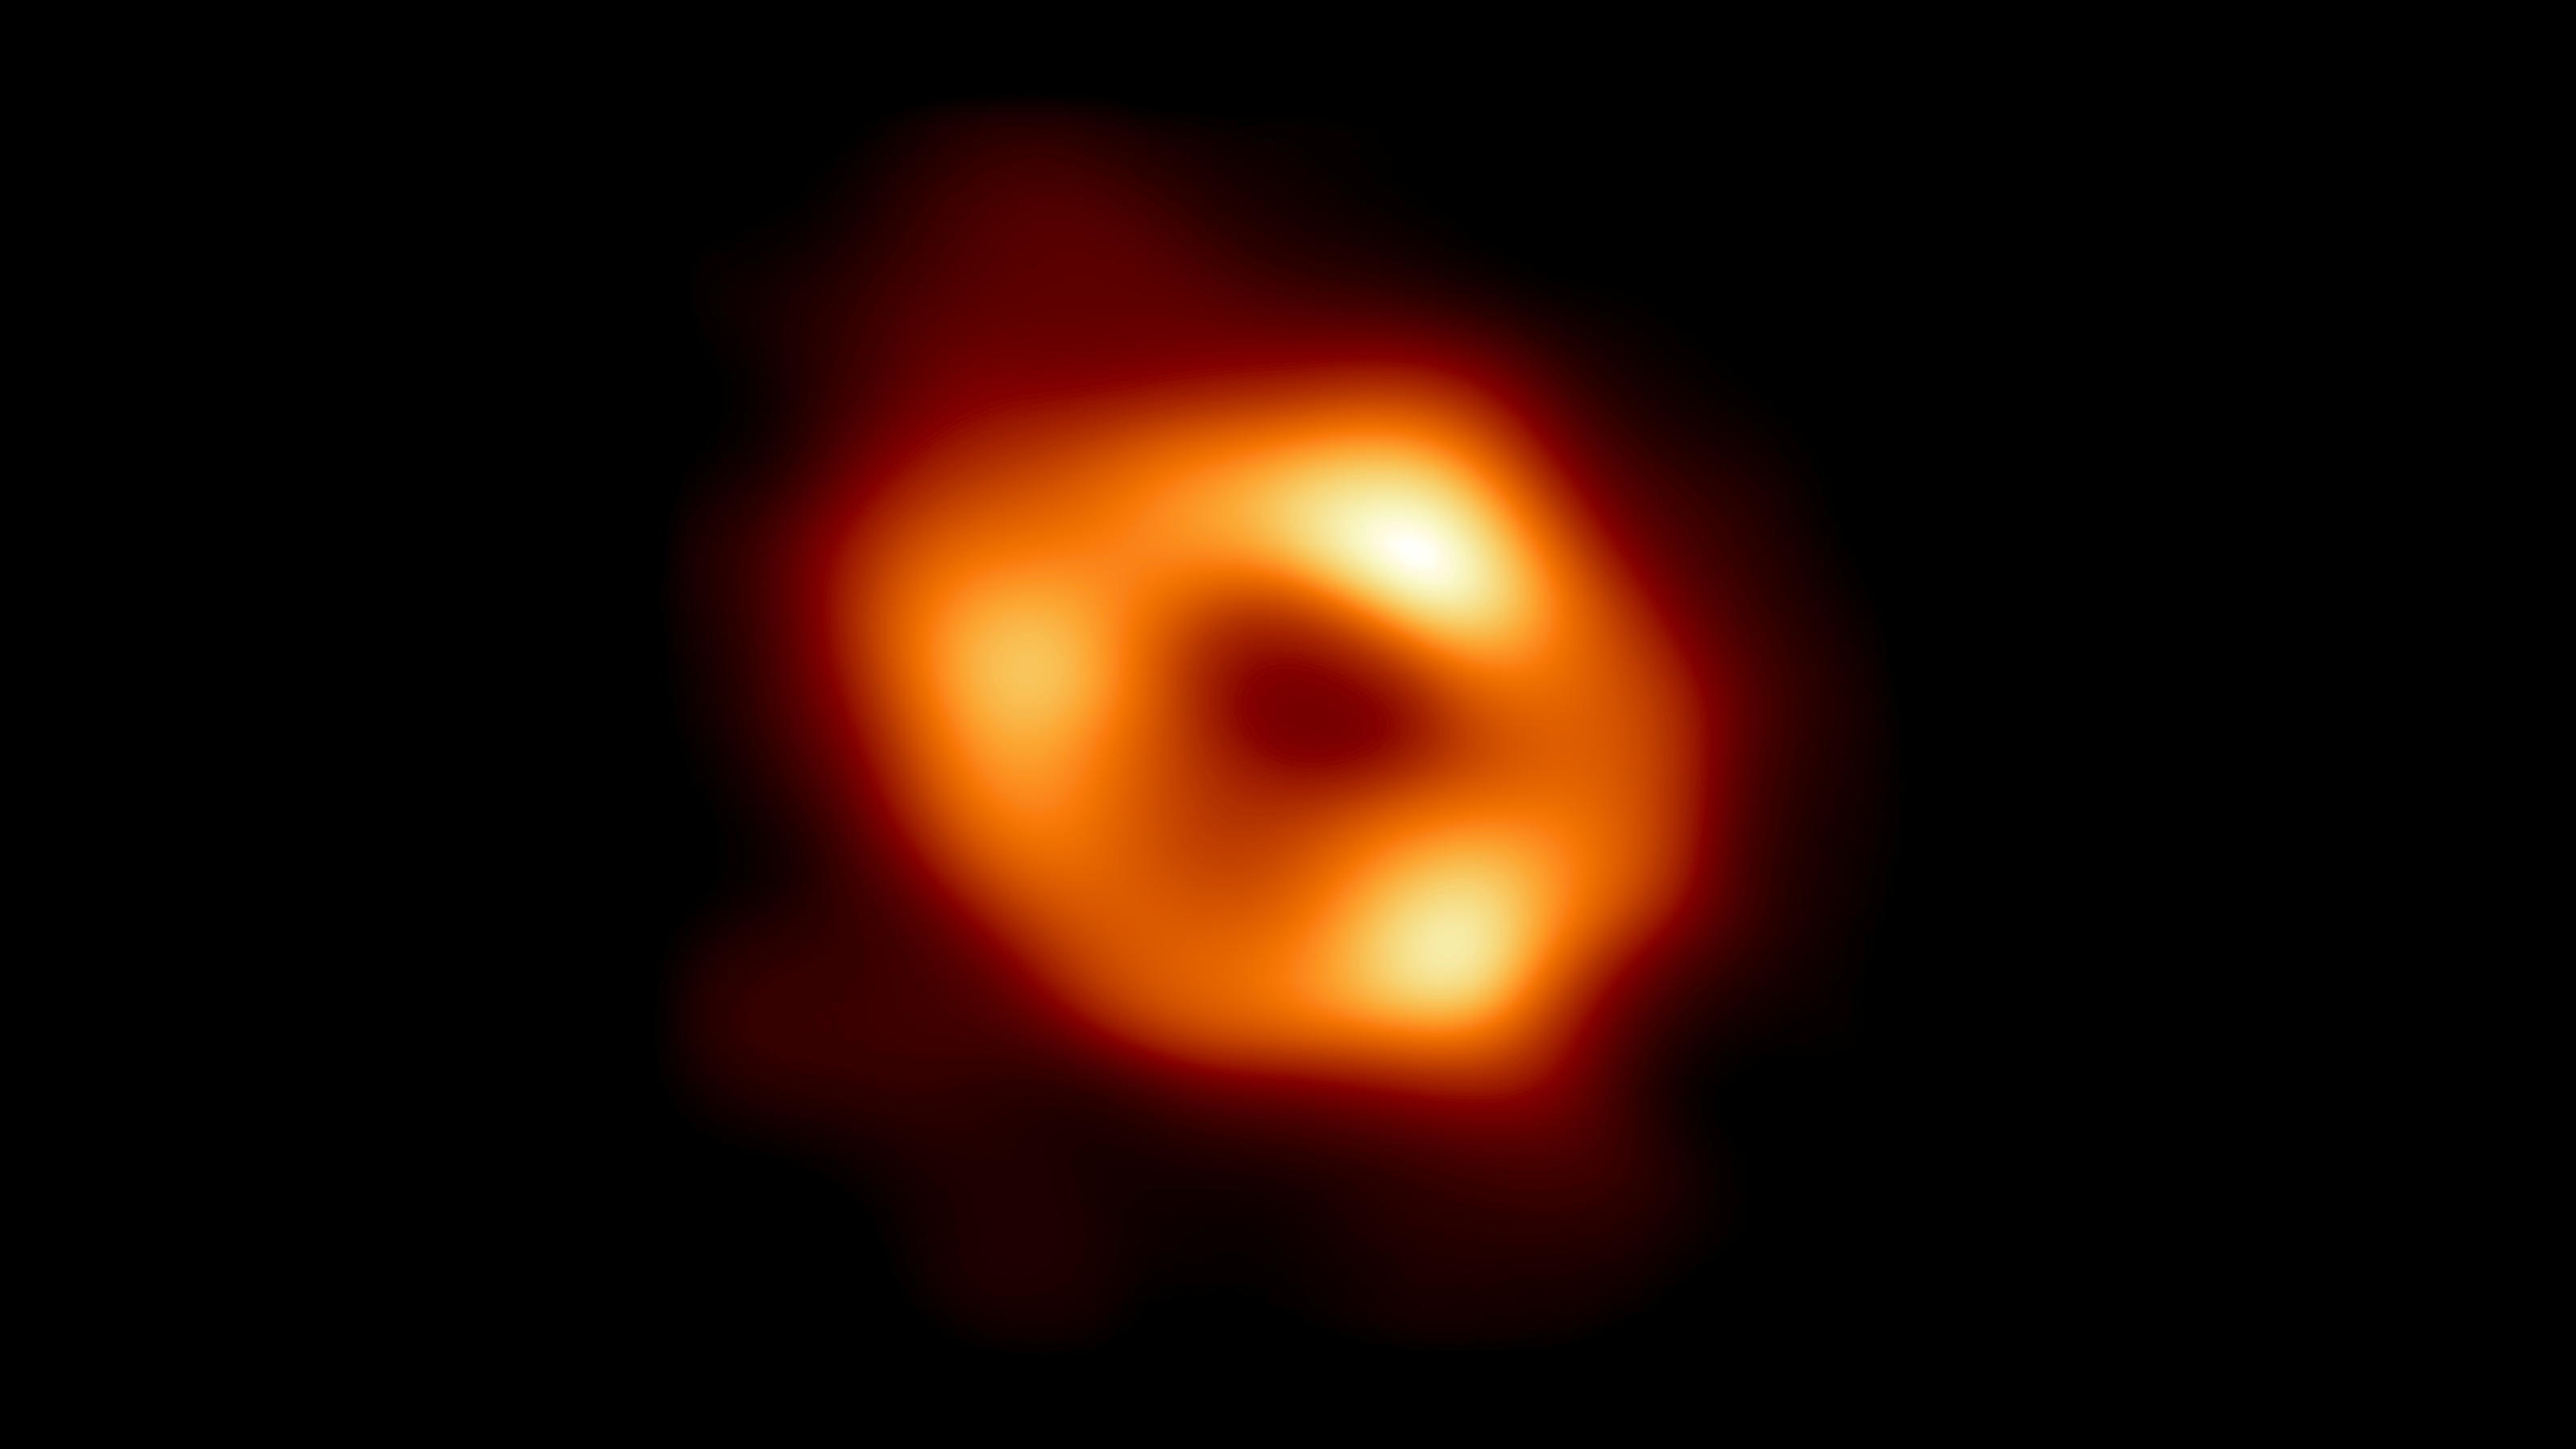 This is the first image of Sagittarius A* (or Sgr A* for short), the supermassive black hole at the center of our galaxy. It was captured by the Event Horizon Telescope (EHT), an array which linked together radio observatories across the planet to fo